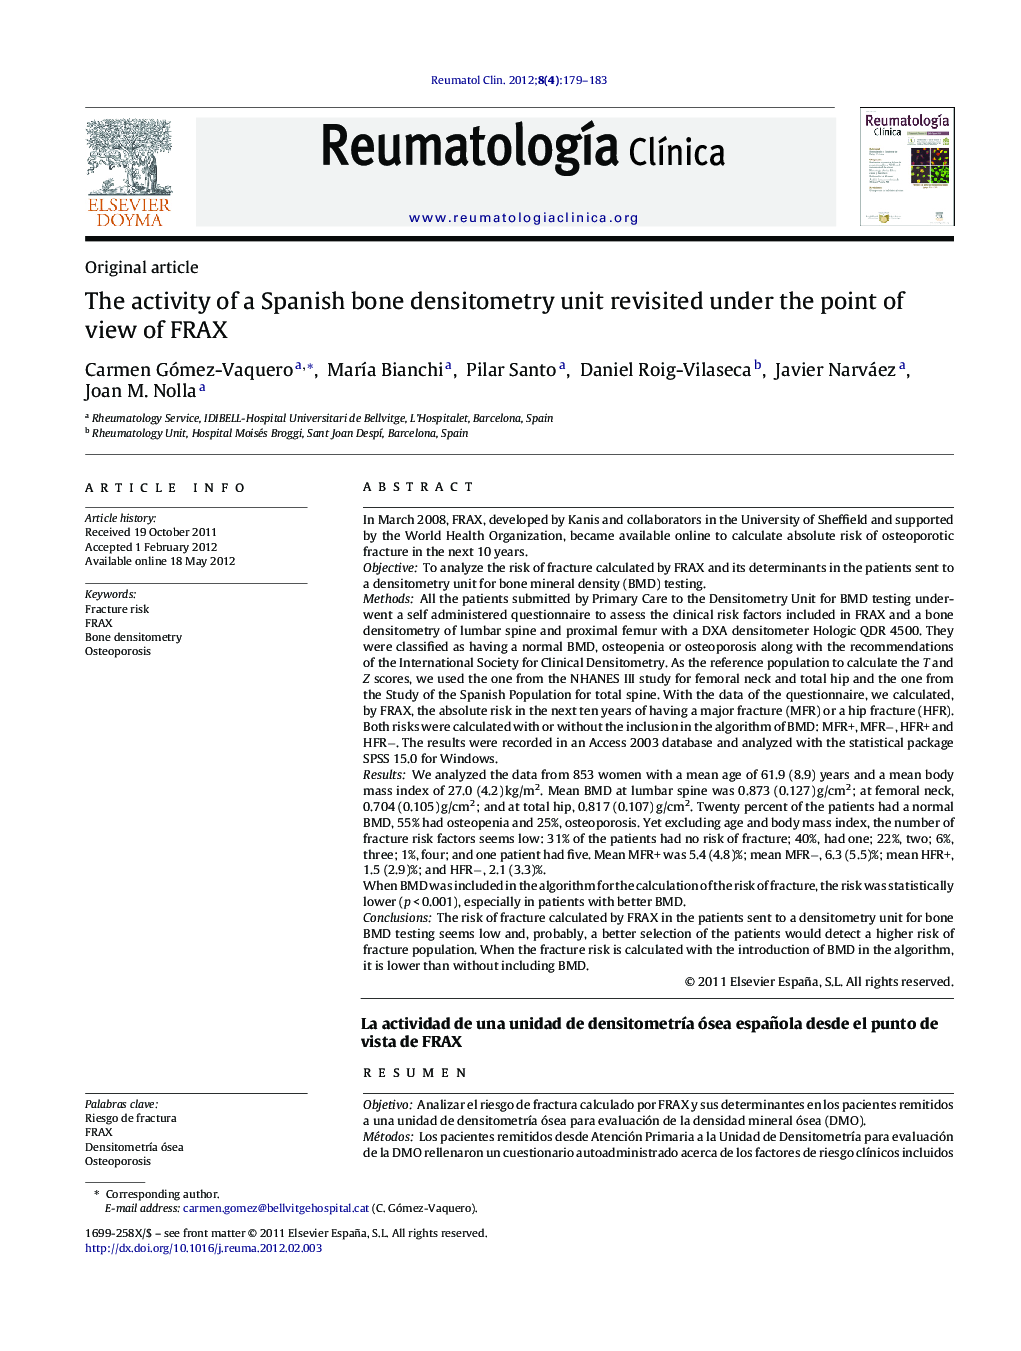 The activity of a Spanish bone densitometry unit revisited under the point of view of FRAX